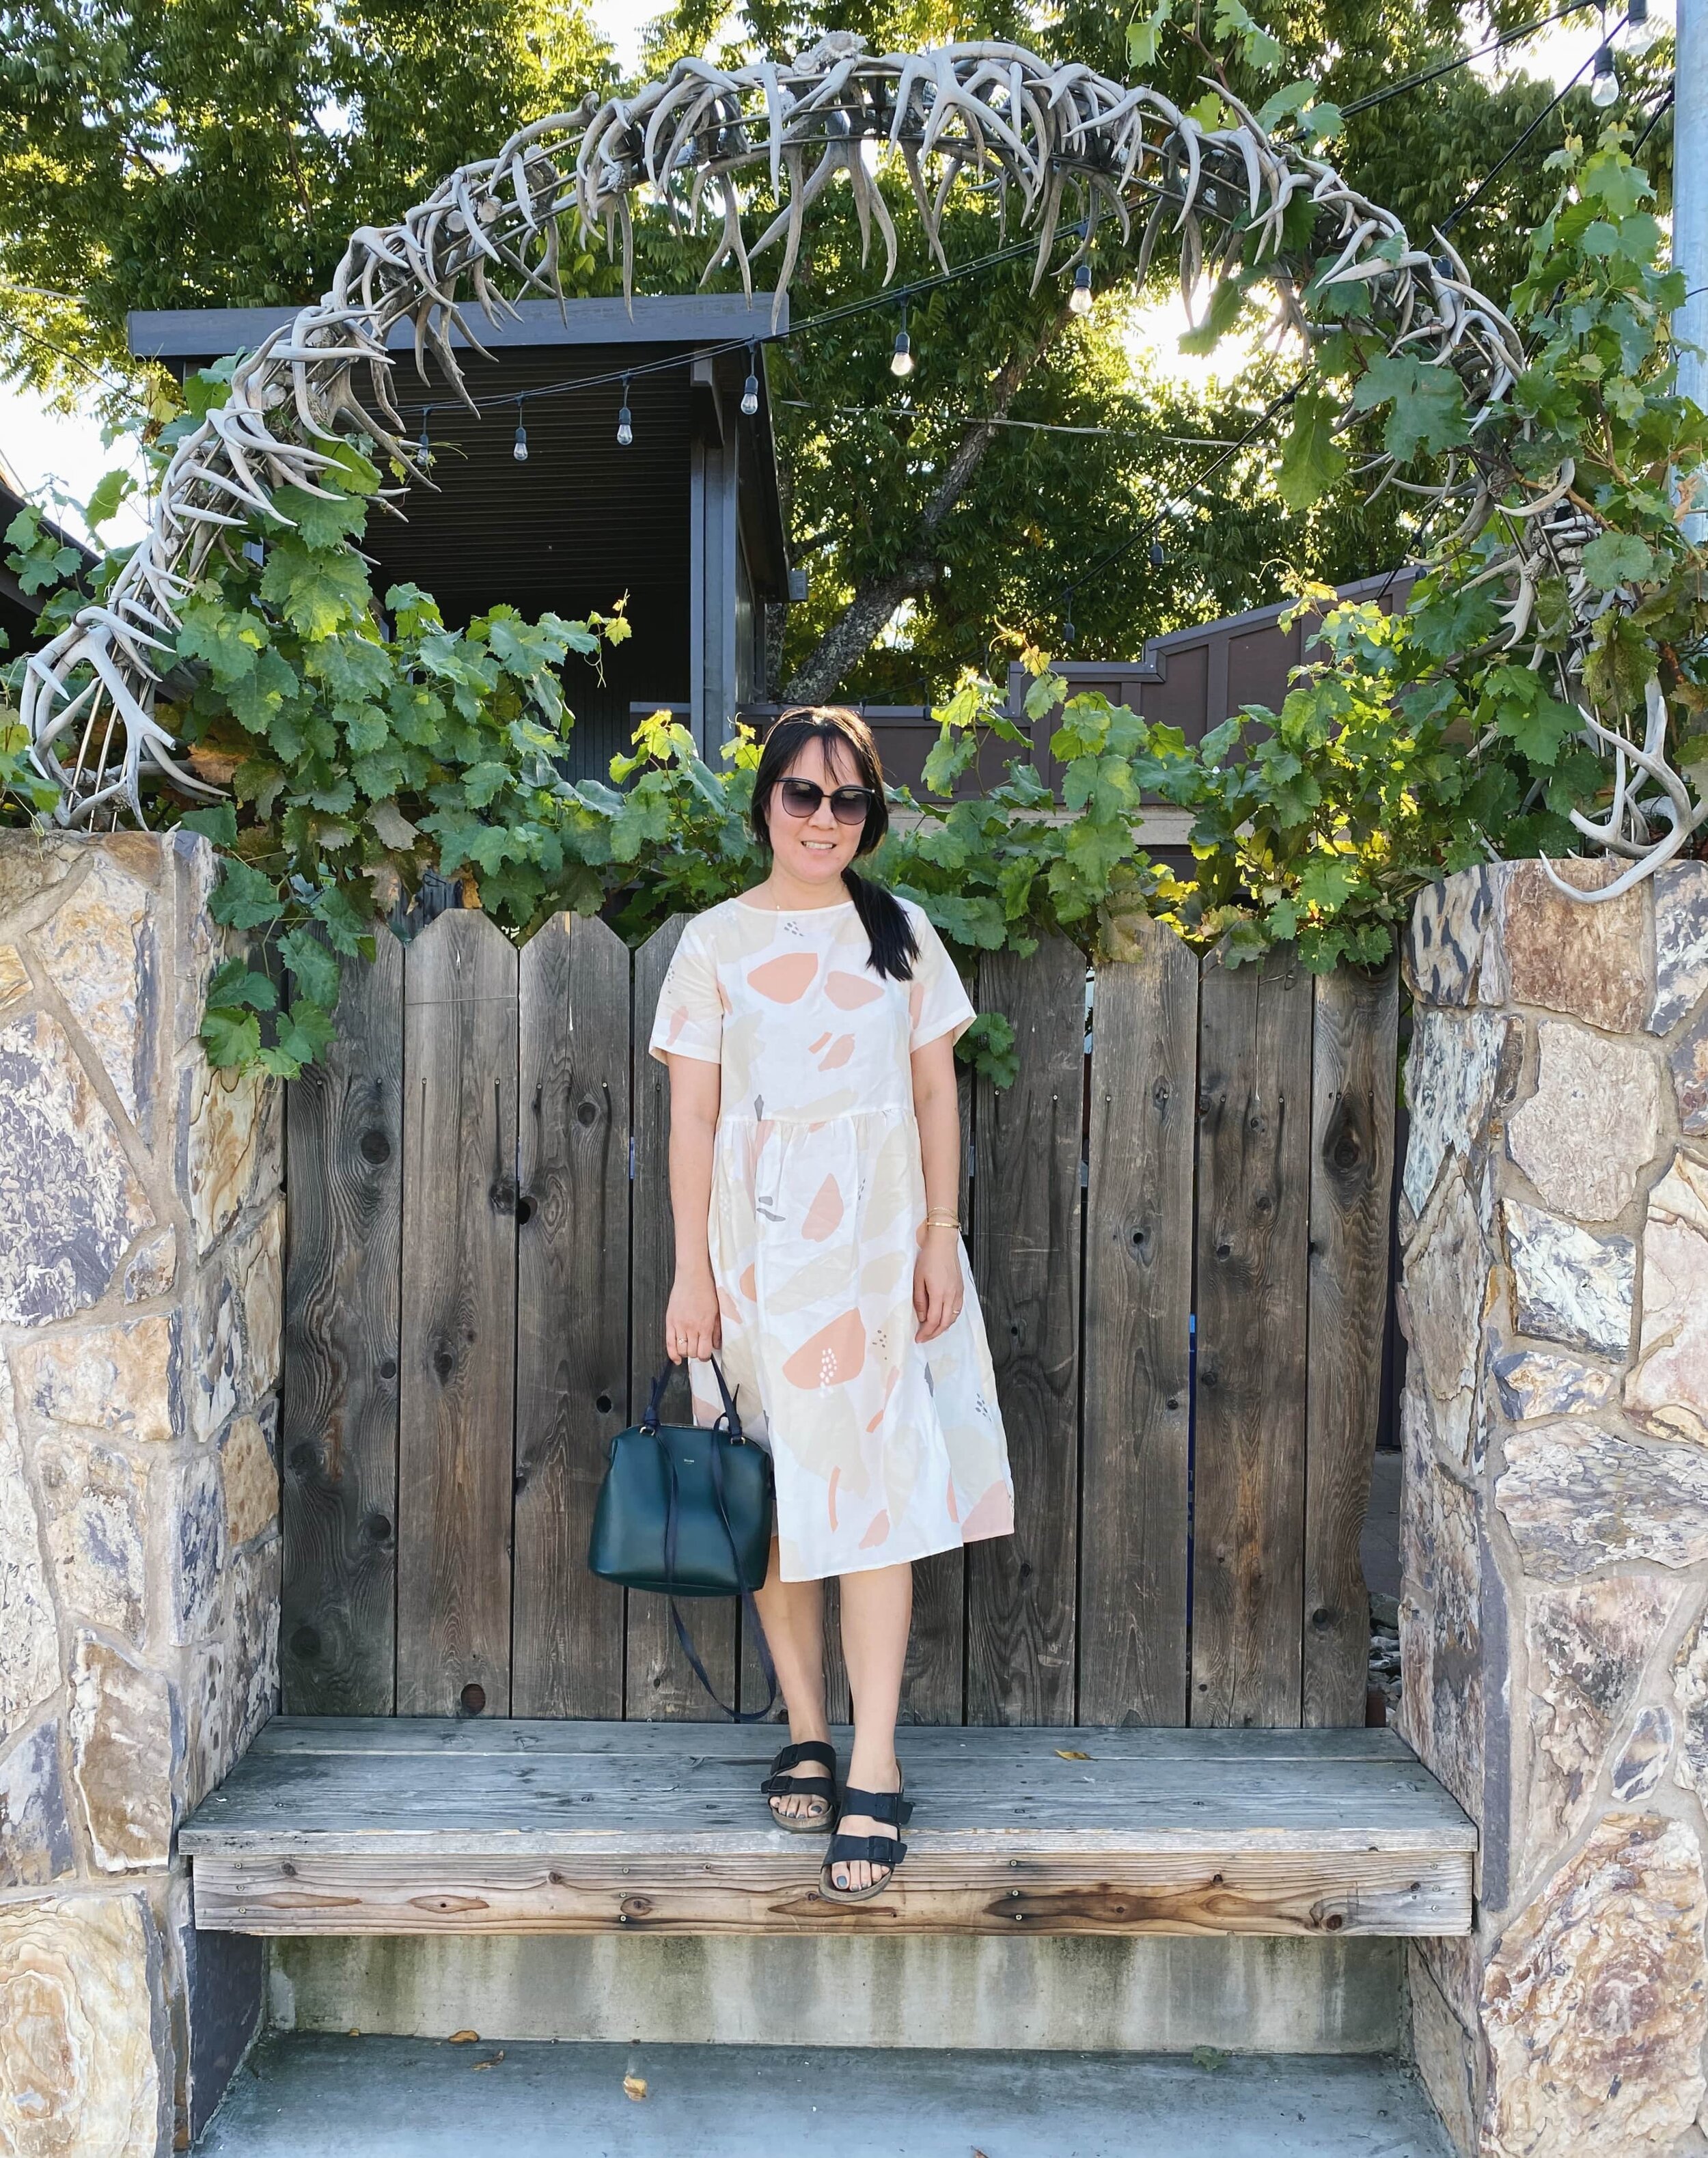 Everlane the Weekend Tiered Dress Review 2021